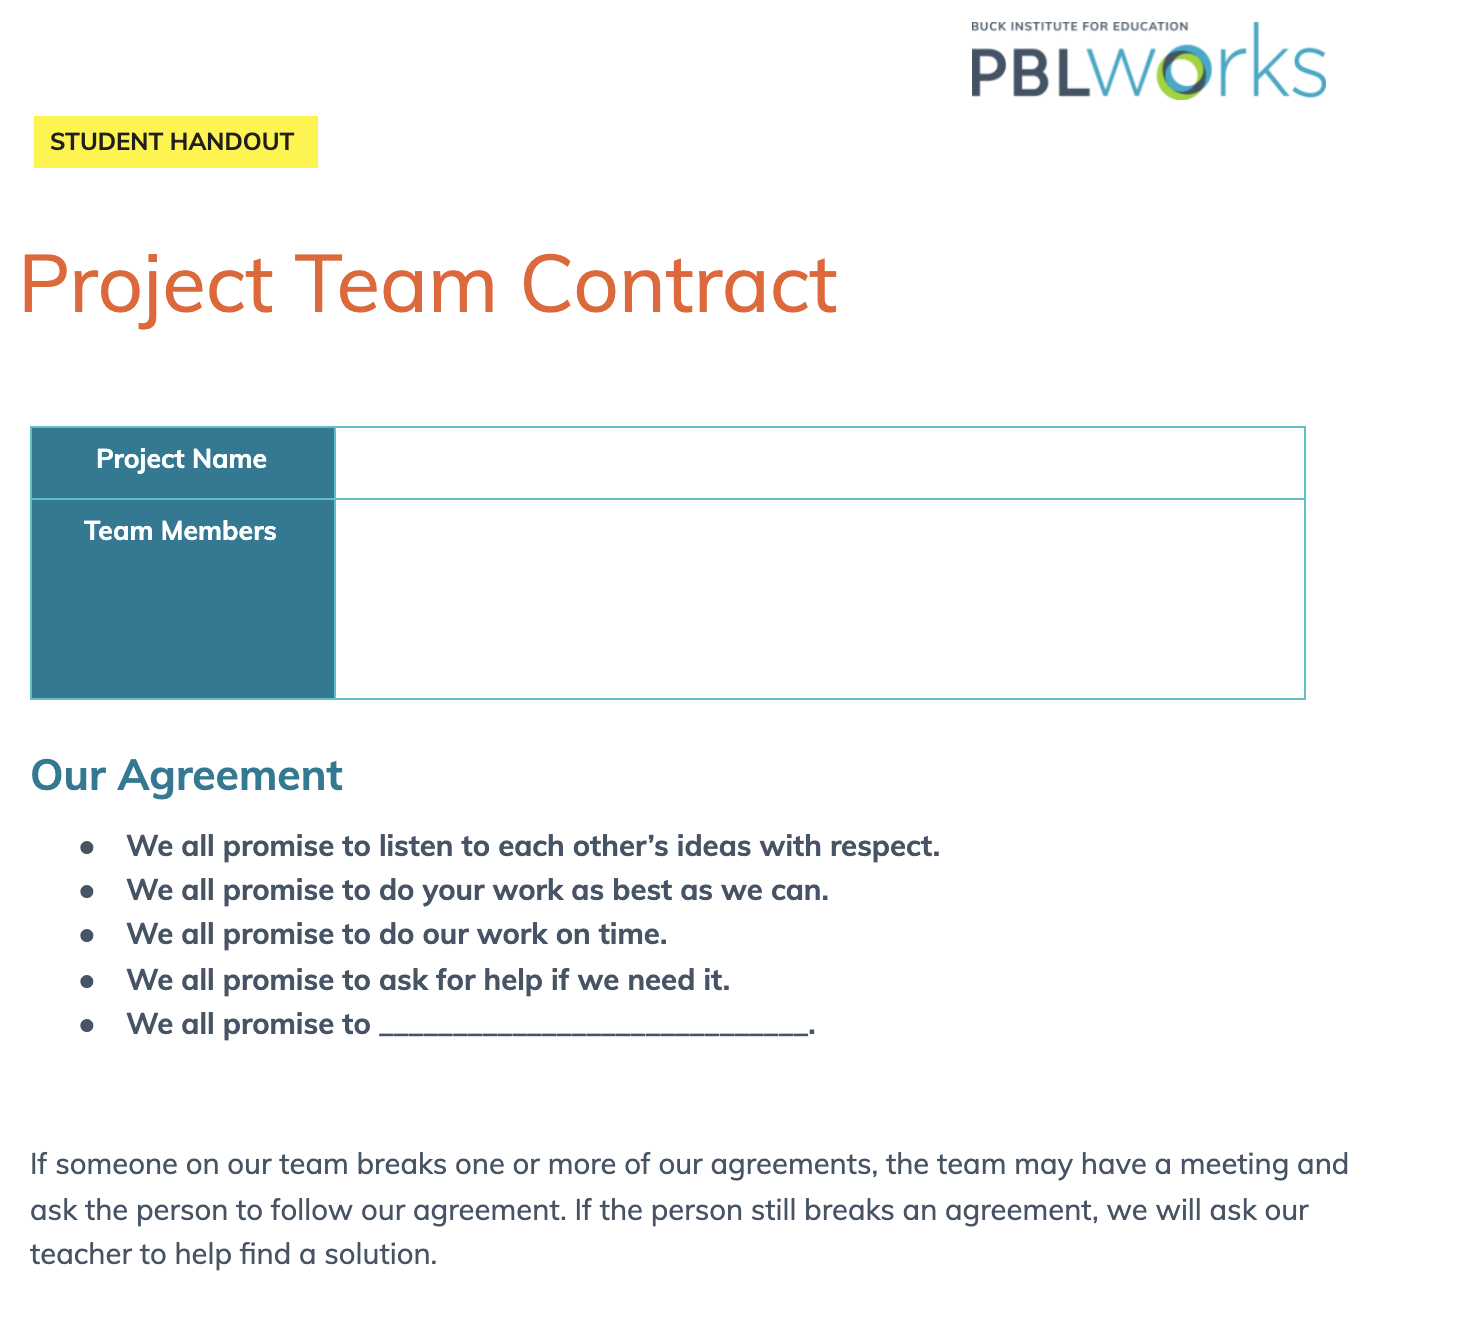 project-team-contract-mypblworks